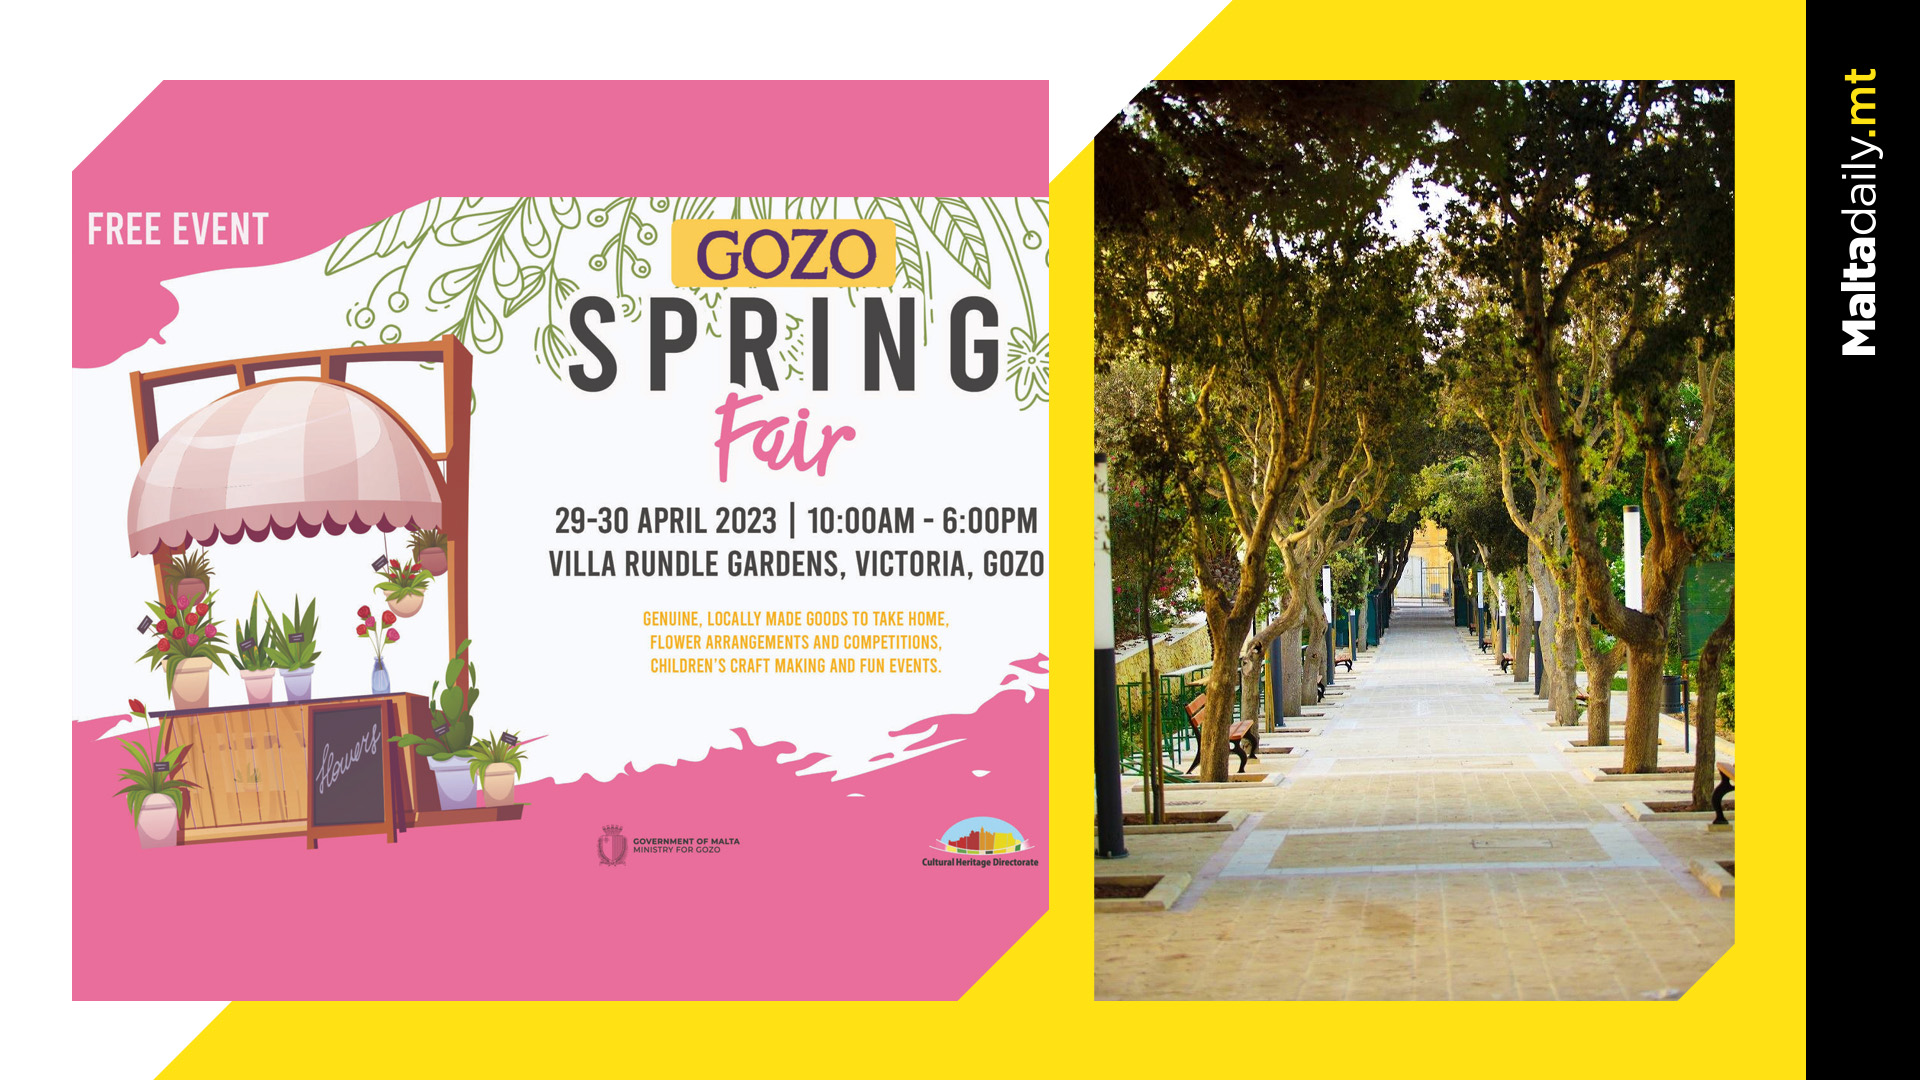 Spring into fun at the Gozo Spring Fair this weekend!